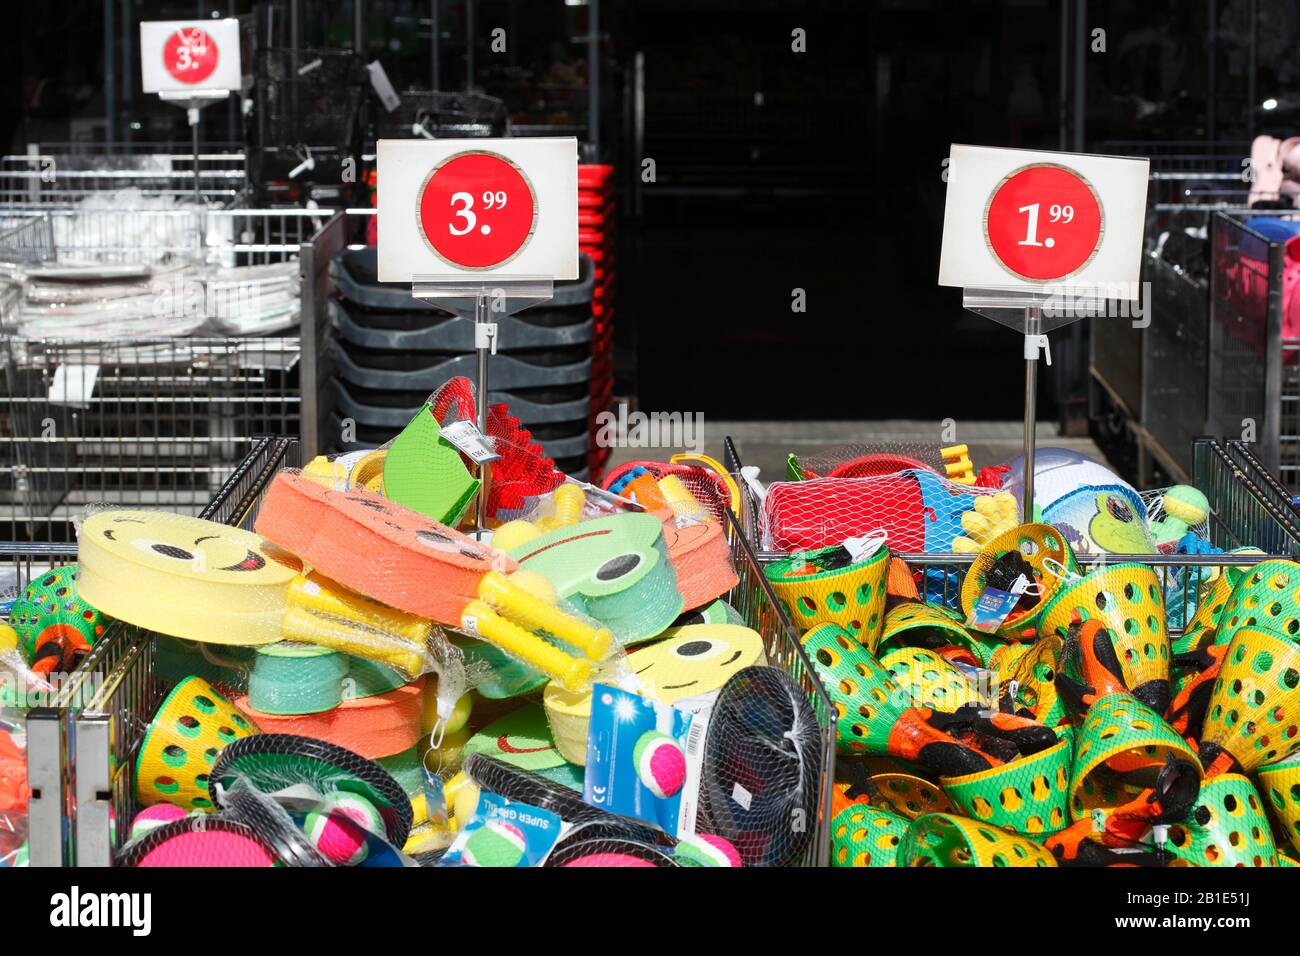 Colorful plastic toys with price tags in front of a shopping mall, Germany Stock Photo